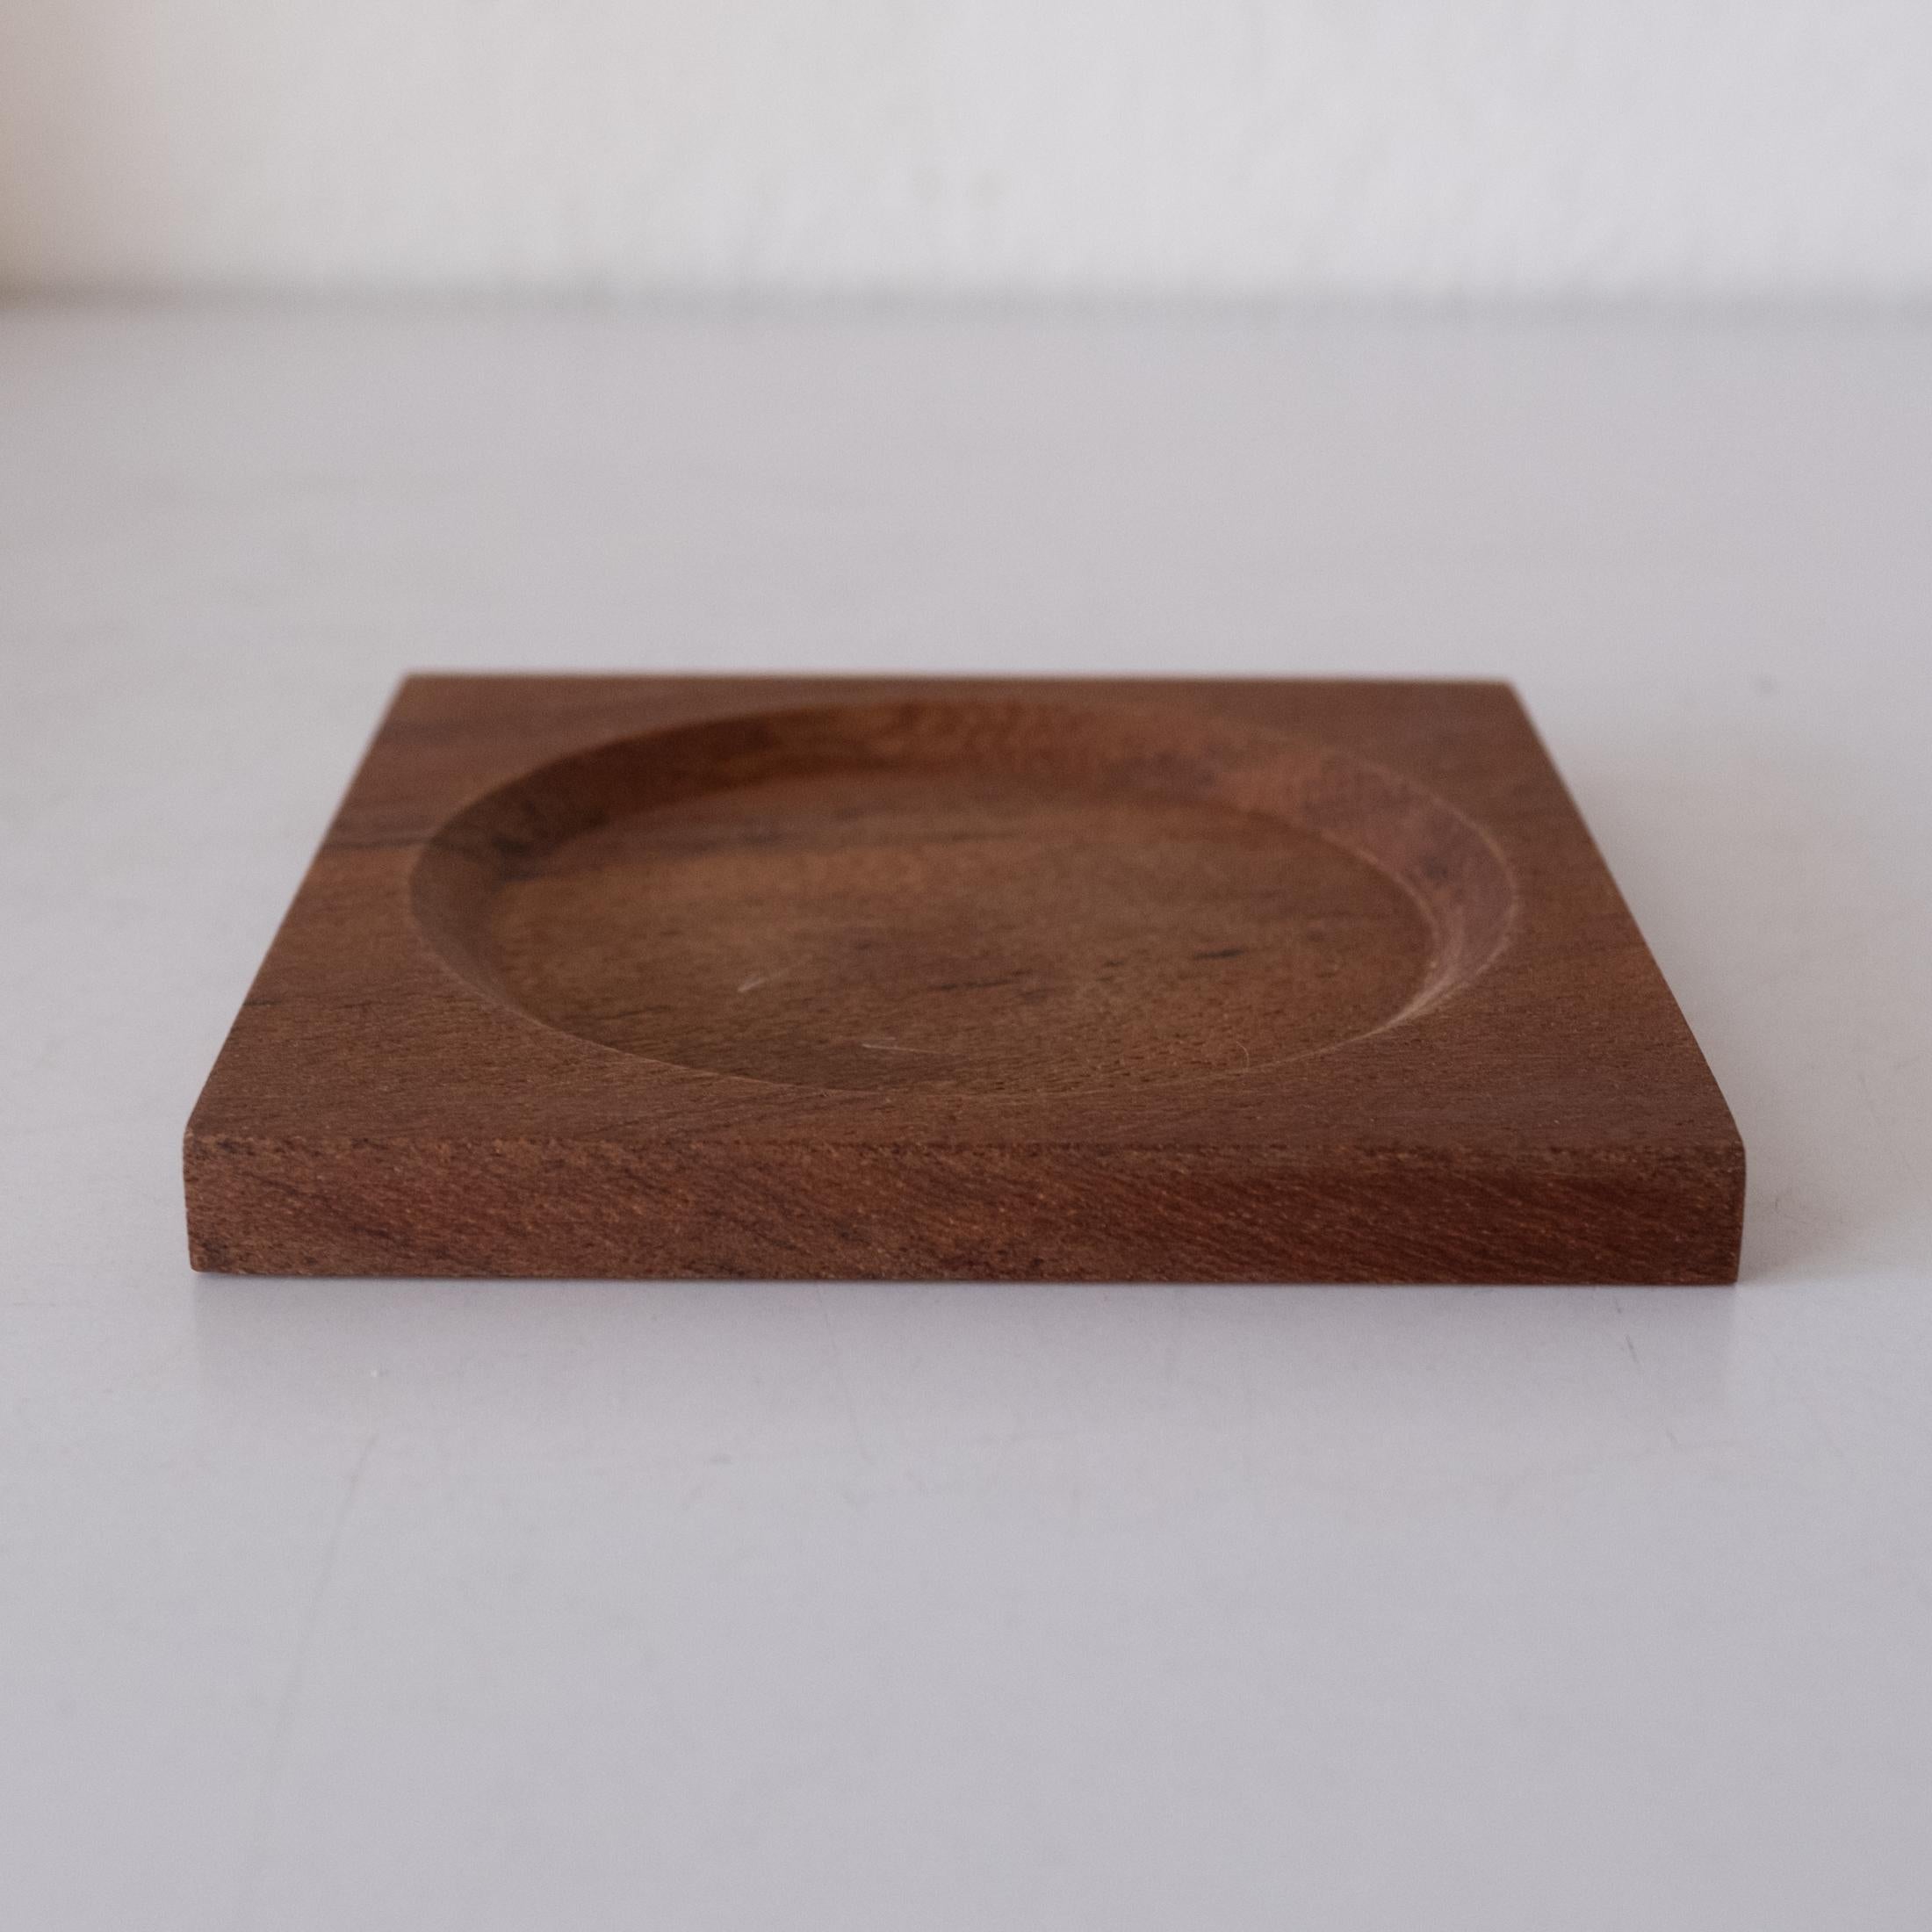 Mid-Century Danish Modern Teak Coaster Set by Jens H. Quistgaard for Dansk In Good Condition For Sale In San Diego, CA